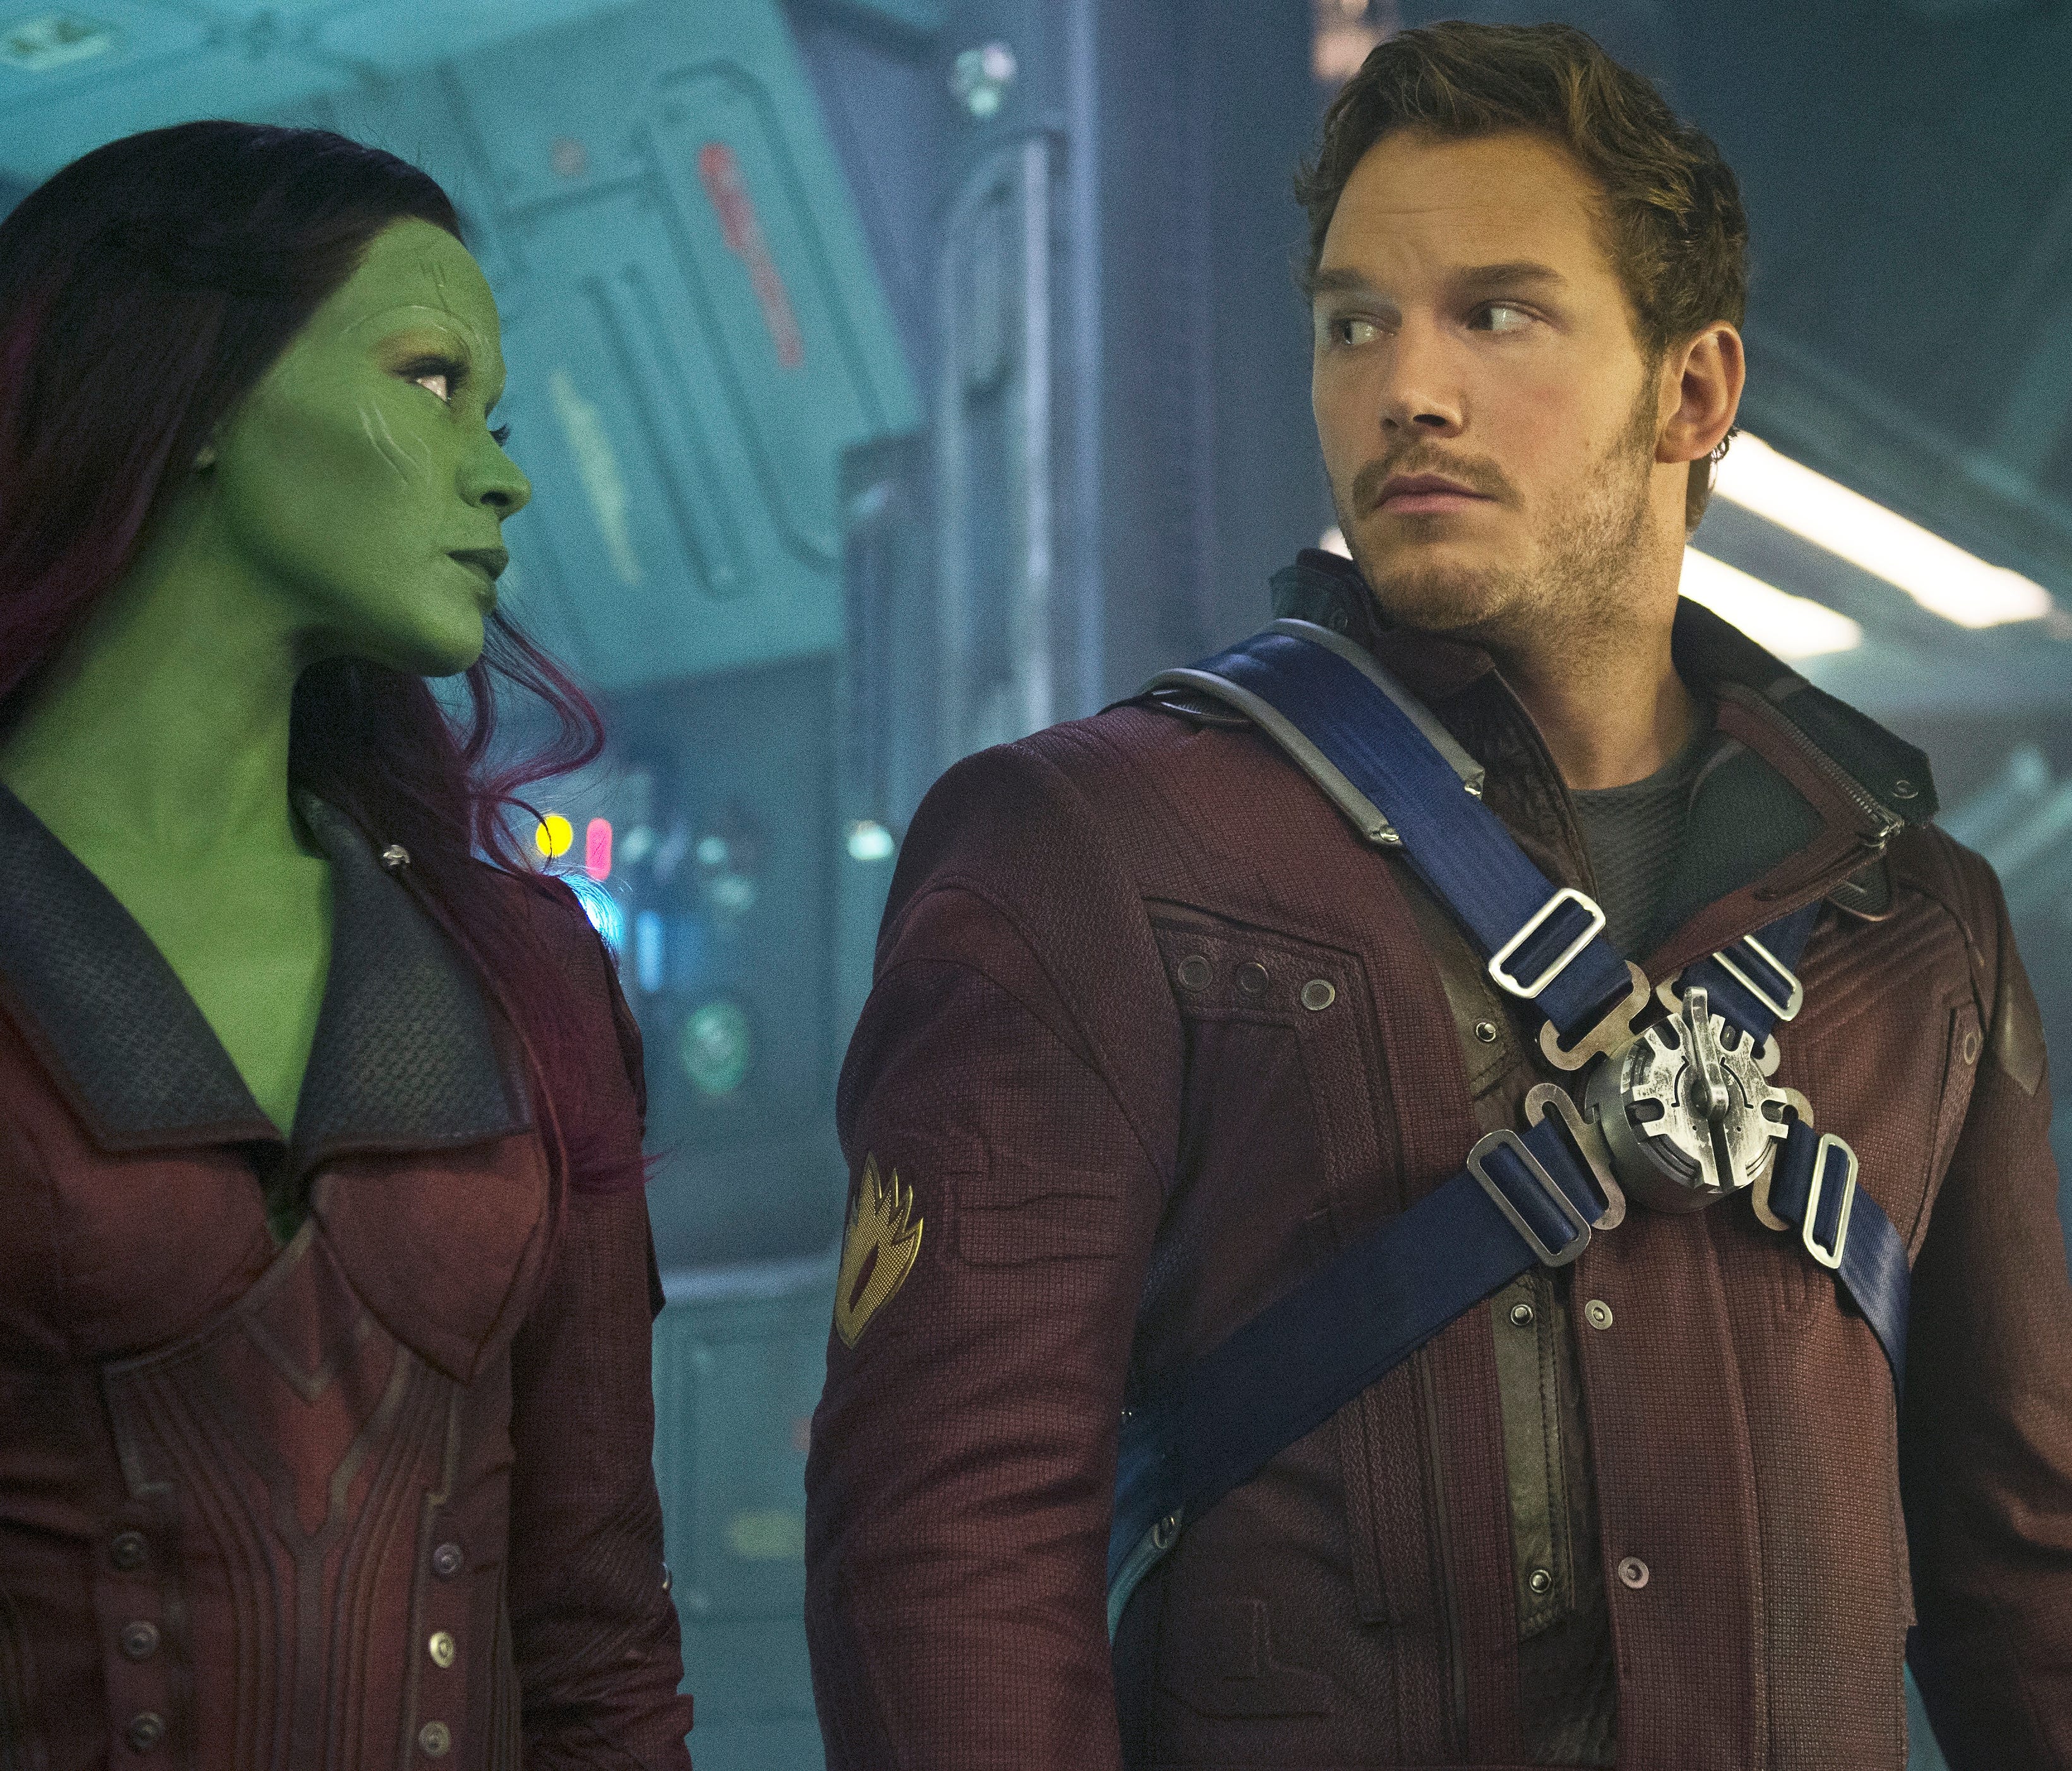 Gamora (Zoe Saldana) and Peter Quill/Star-Lord (Chris Pratt) in a scene from the motion picture 